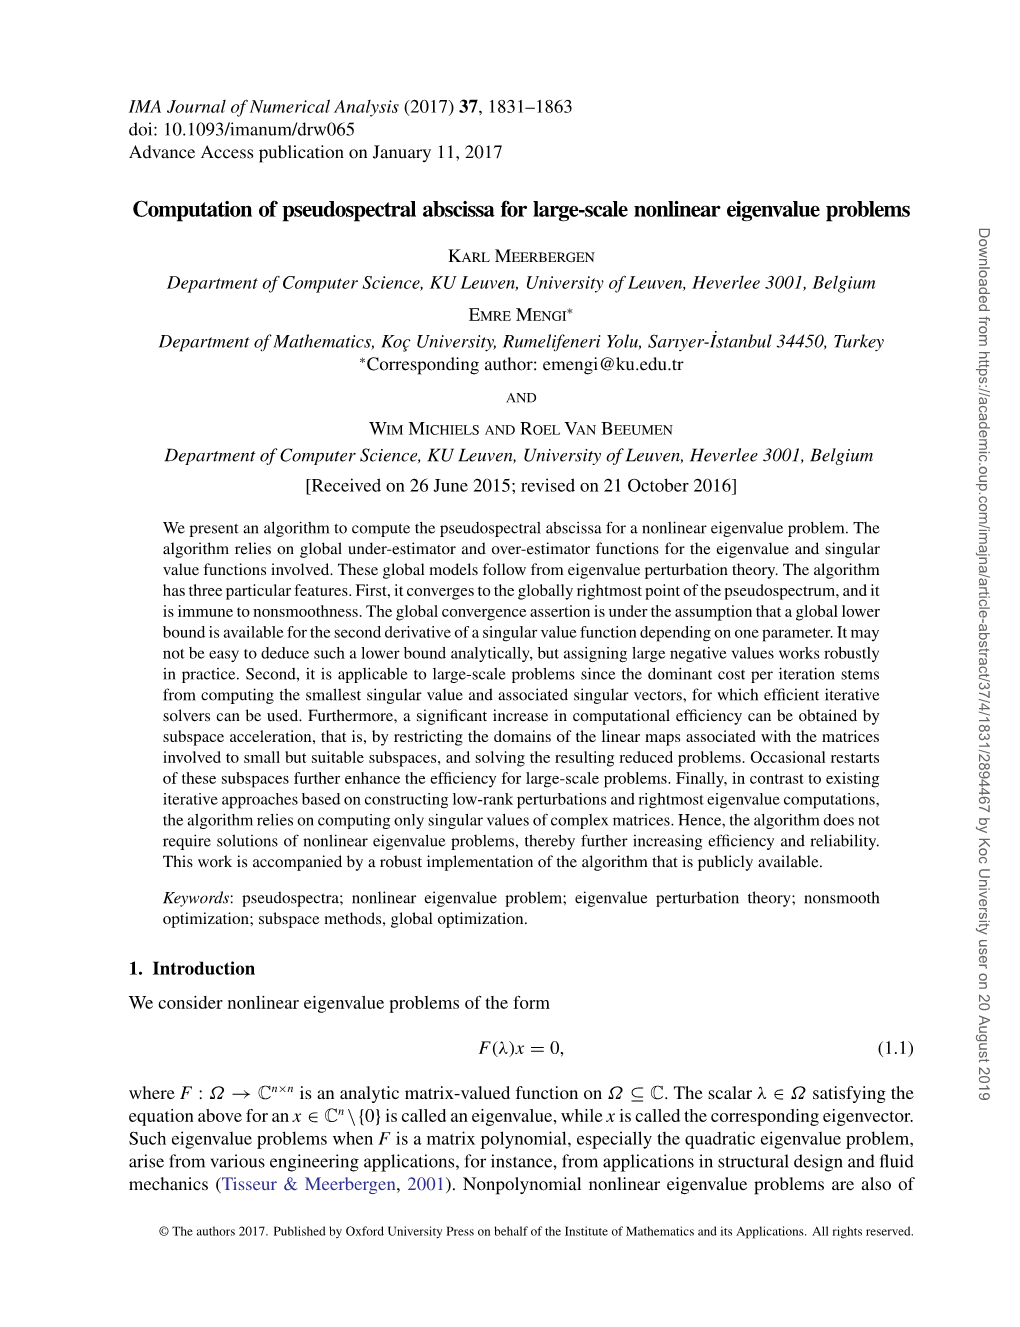 Computation of Pseudospectral Abscissa for Large-Scale Nonlinear